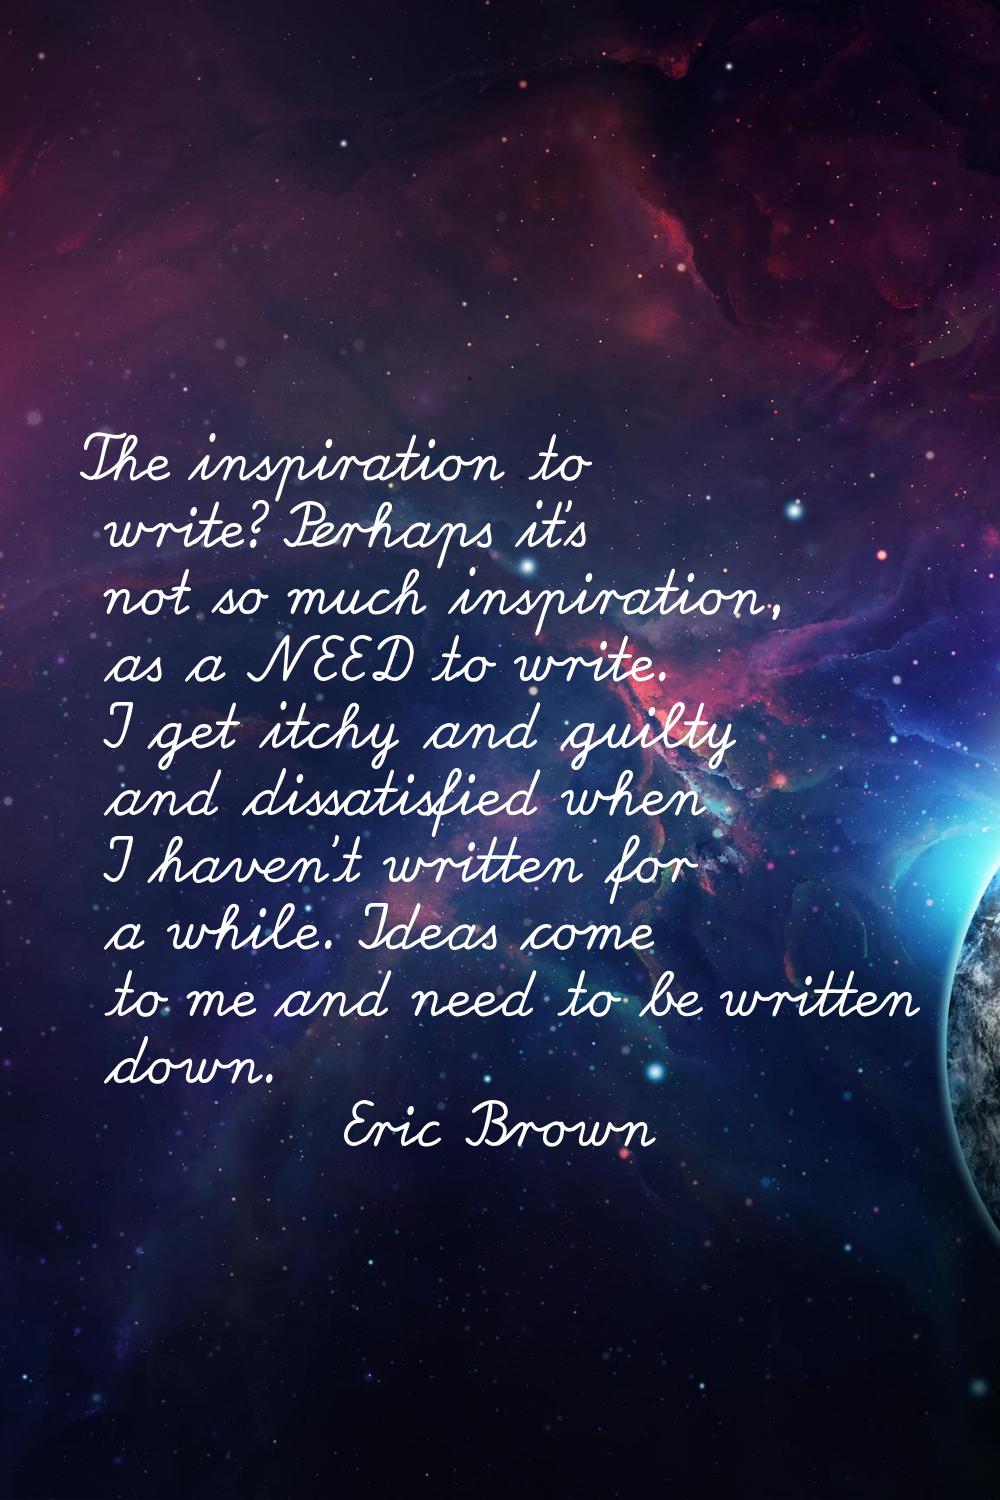 The inspiration to write? Perhaps it's not so much inspiration, as a NEED to write. I get itchy and